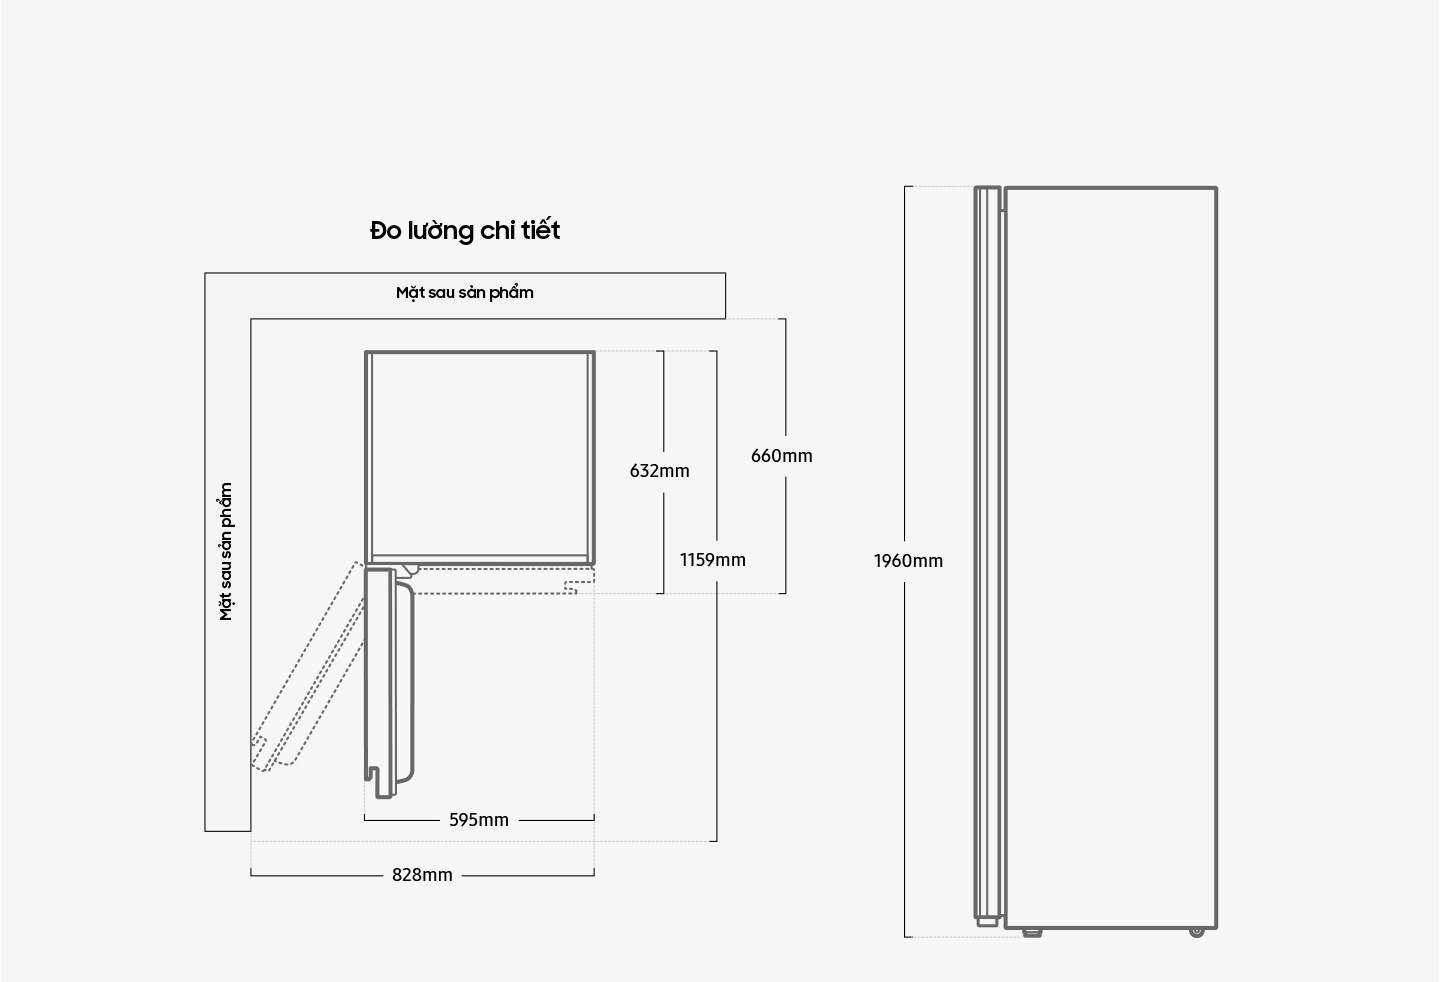 DF9000RM 1960mm high, 595mm long, and 632mm deep when the door is closed. Including space between the rear wall and the dresser, the depth is 660mm. When the door is 90 degrees open, the total depth is 1159mm, including the door. With the door opened to the max, the length is 828mm measured from the corner without the door.